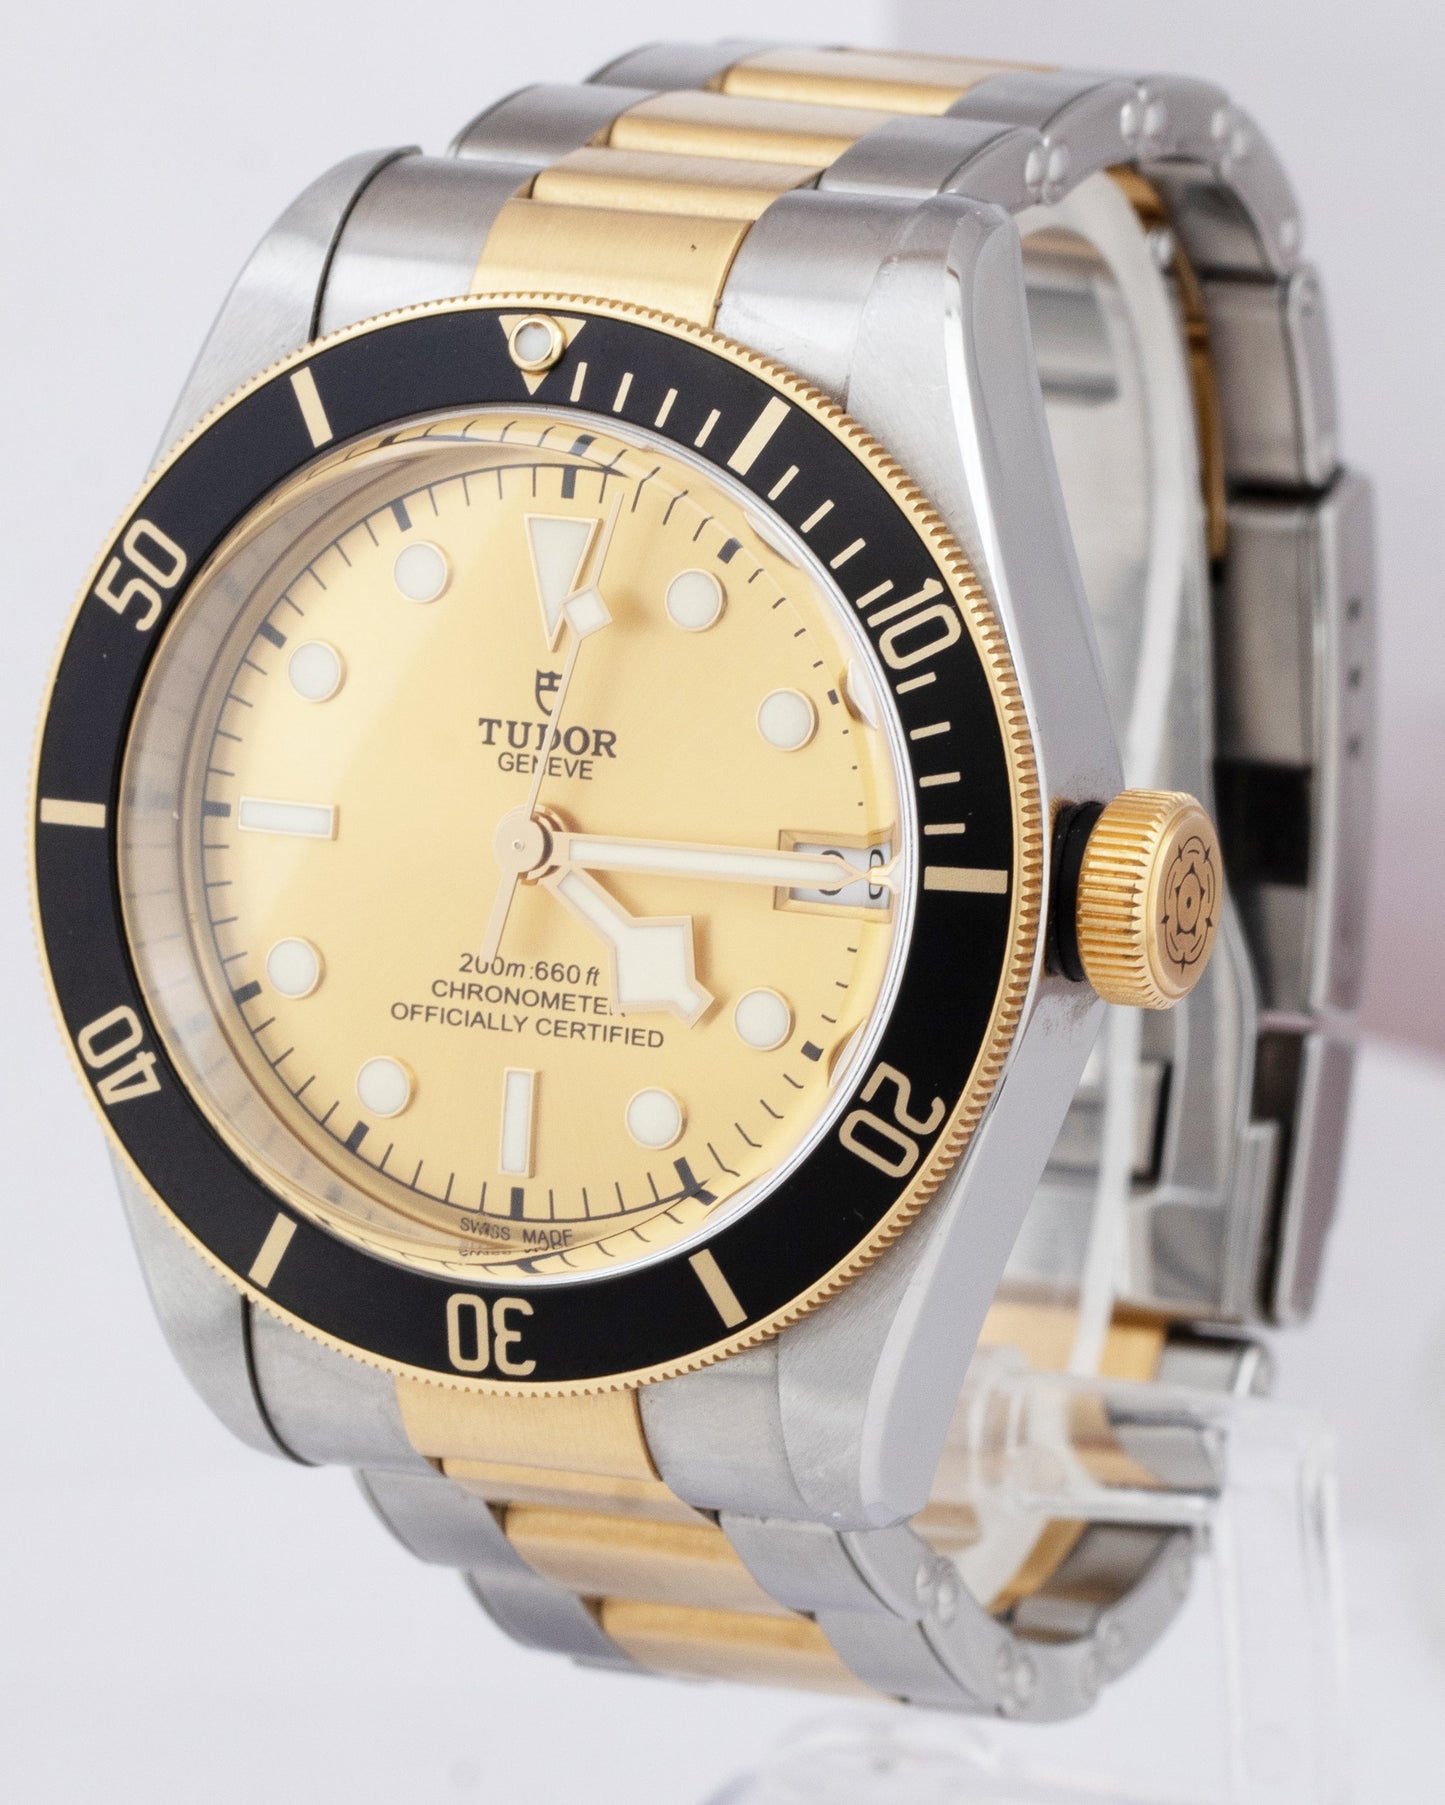 2018 Tudor Black Bay Heritage Two-Tone Gold Stainless Steel 41mm Watch 79733 N